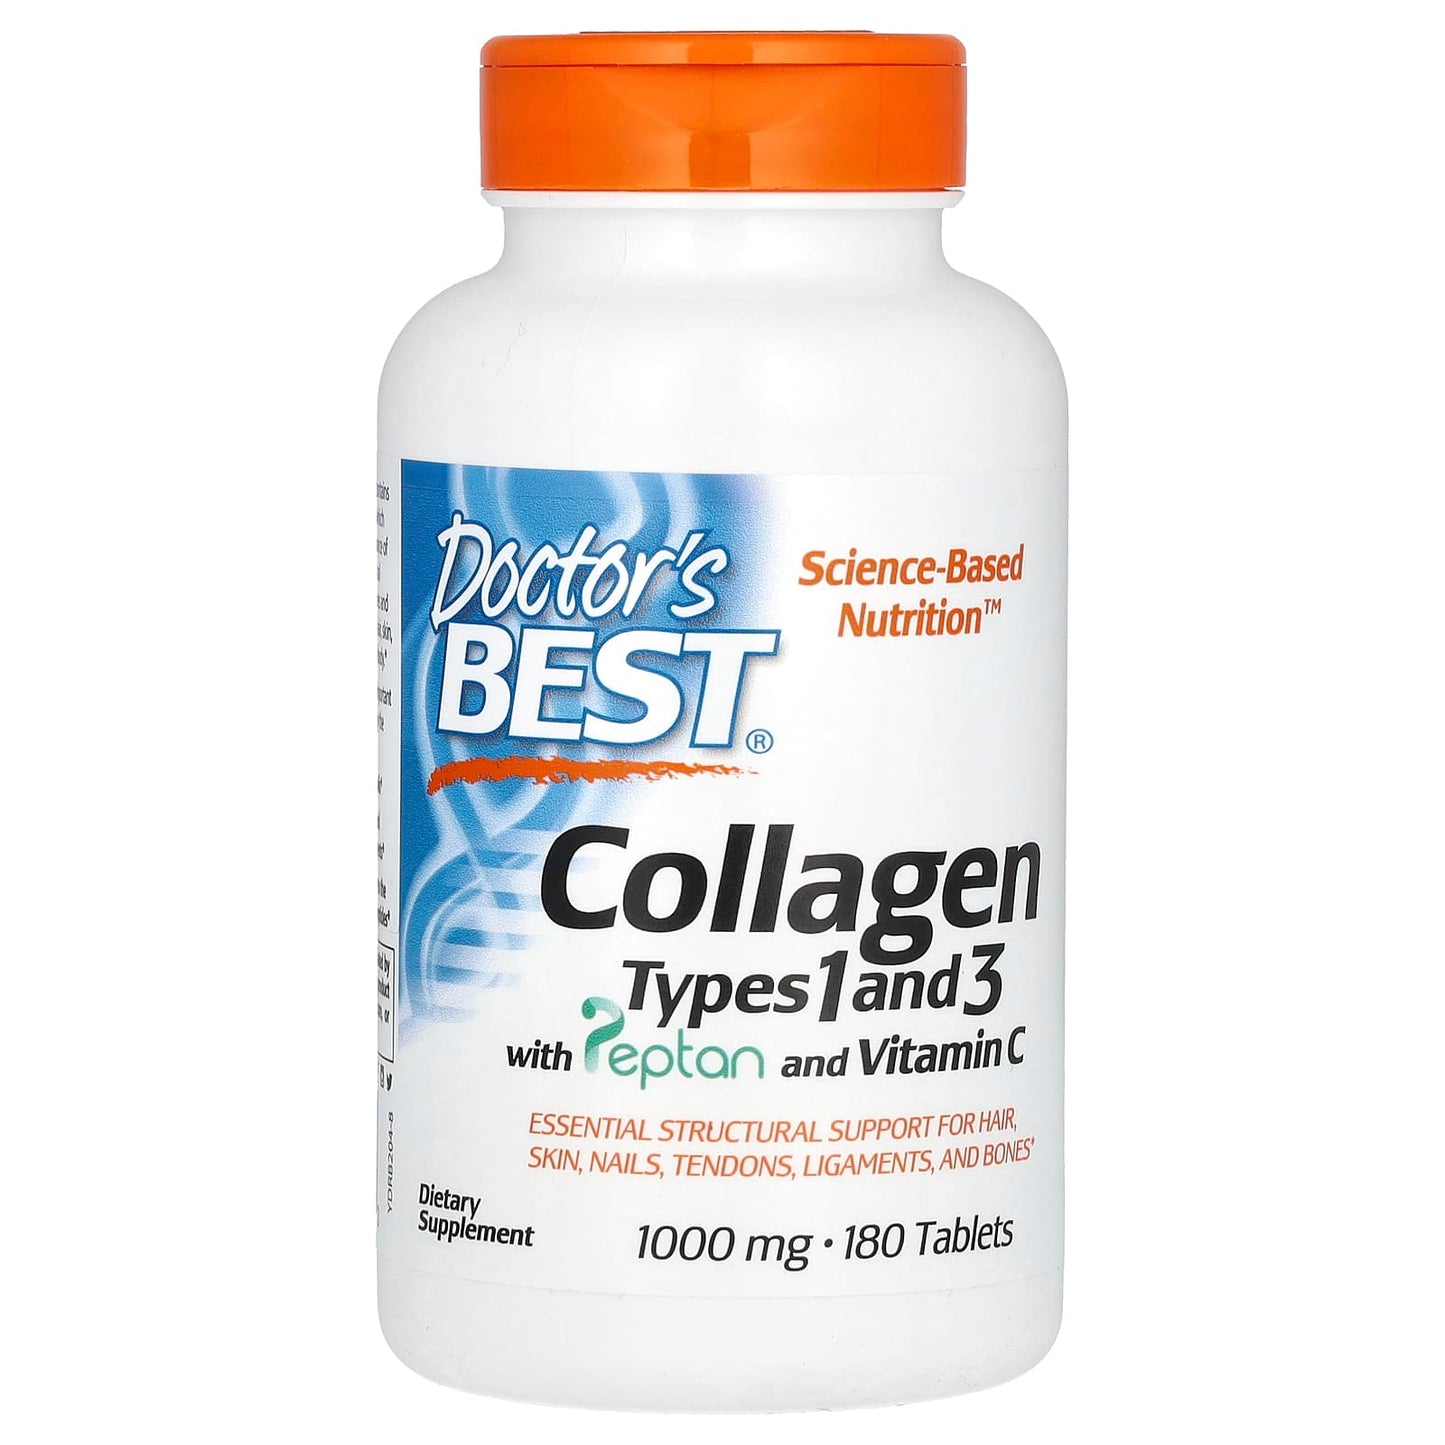 Doctor's Best-Collagen Types 1 and 3 with Peptan and Vitamin C-180 Tablets